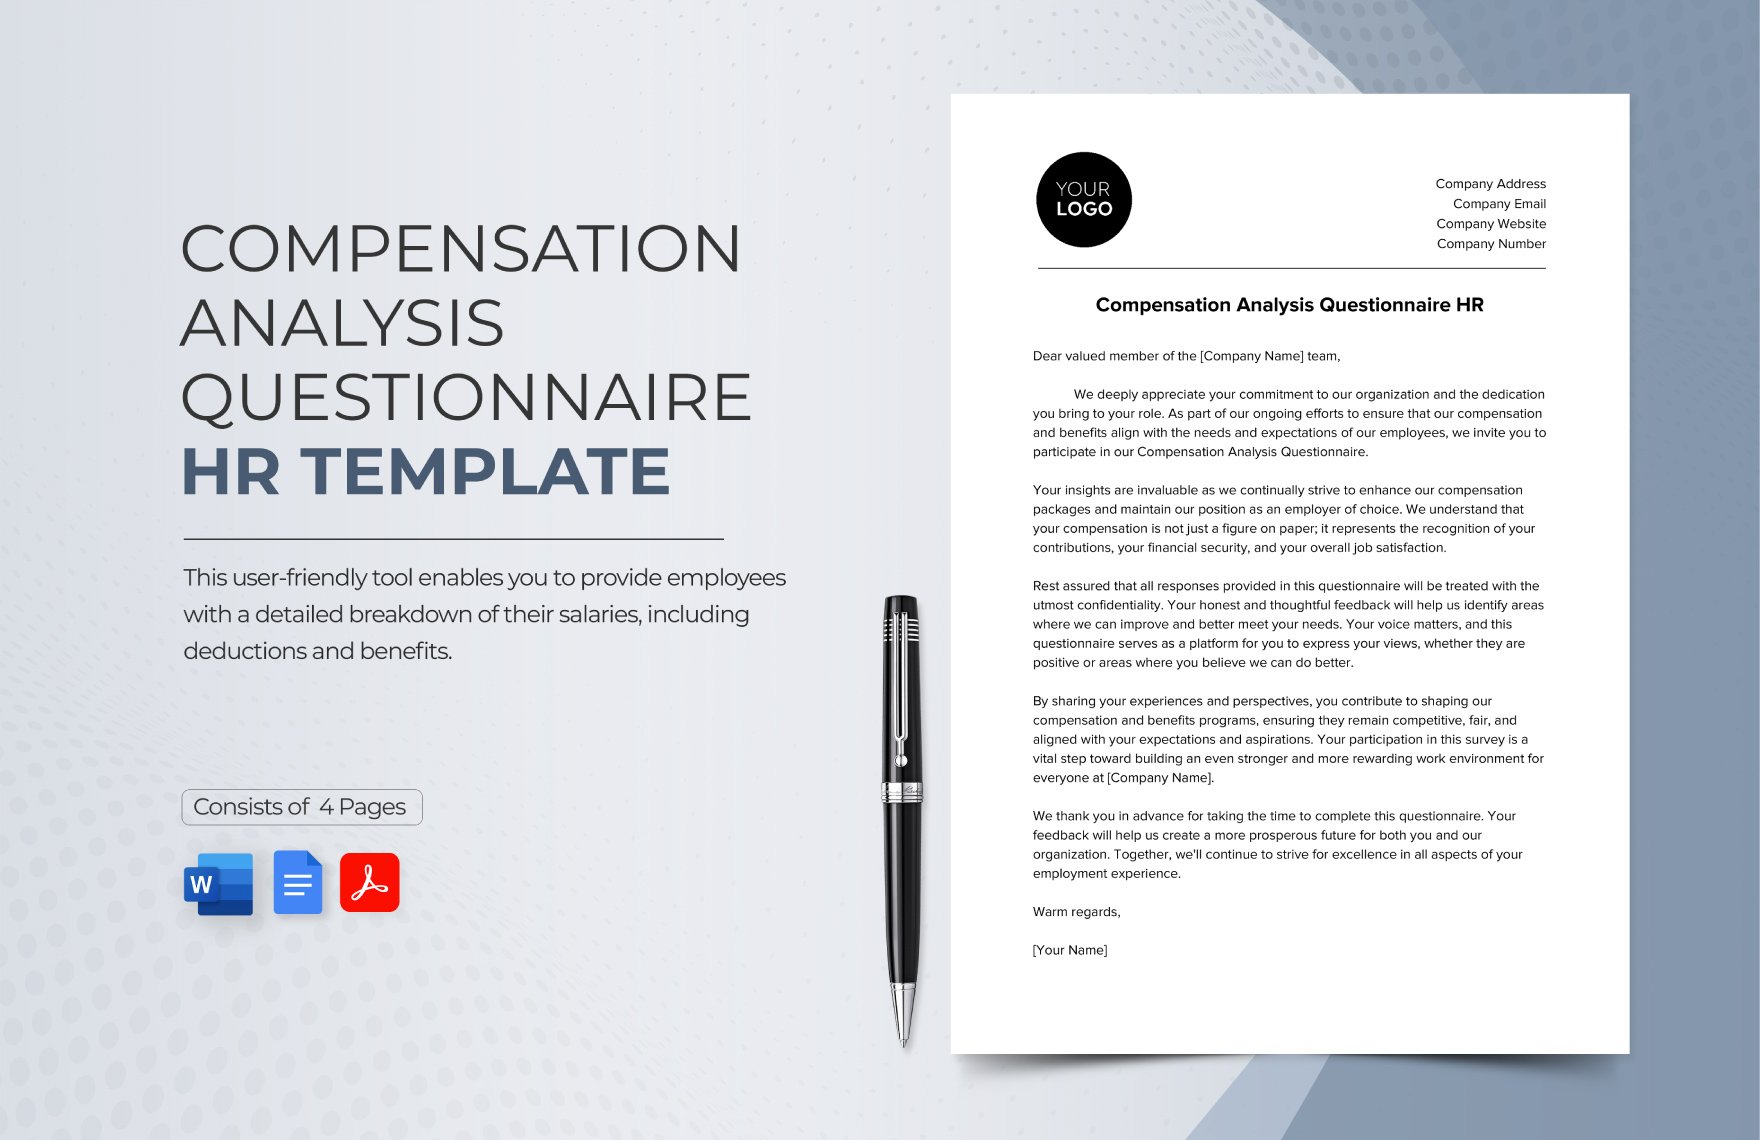 Compensation Analysis Questionnaire HR Template in Word, Google Docs, PDF